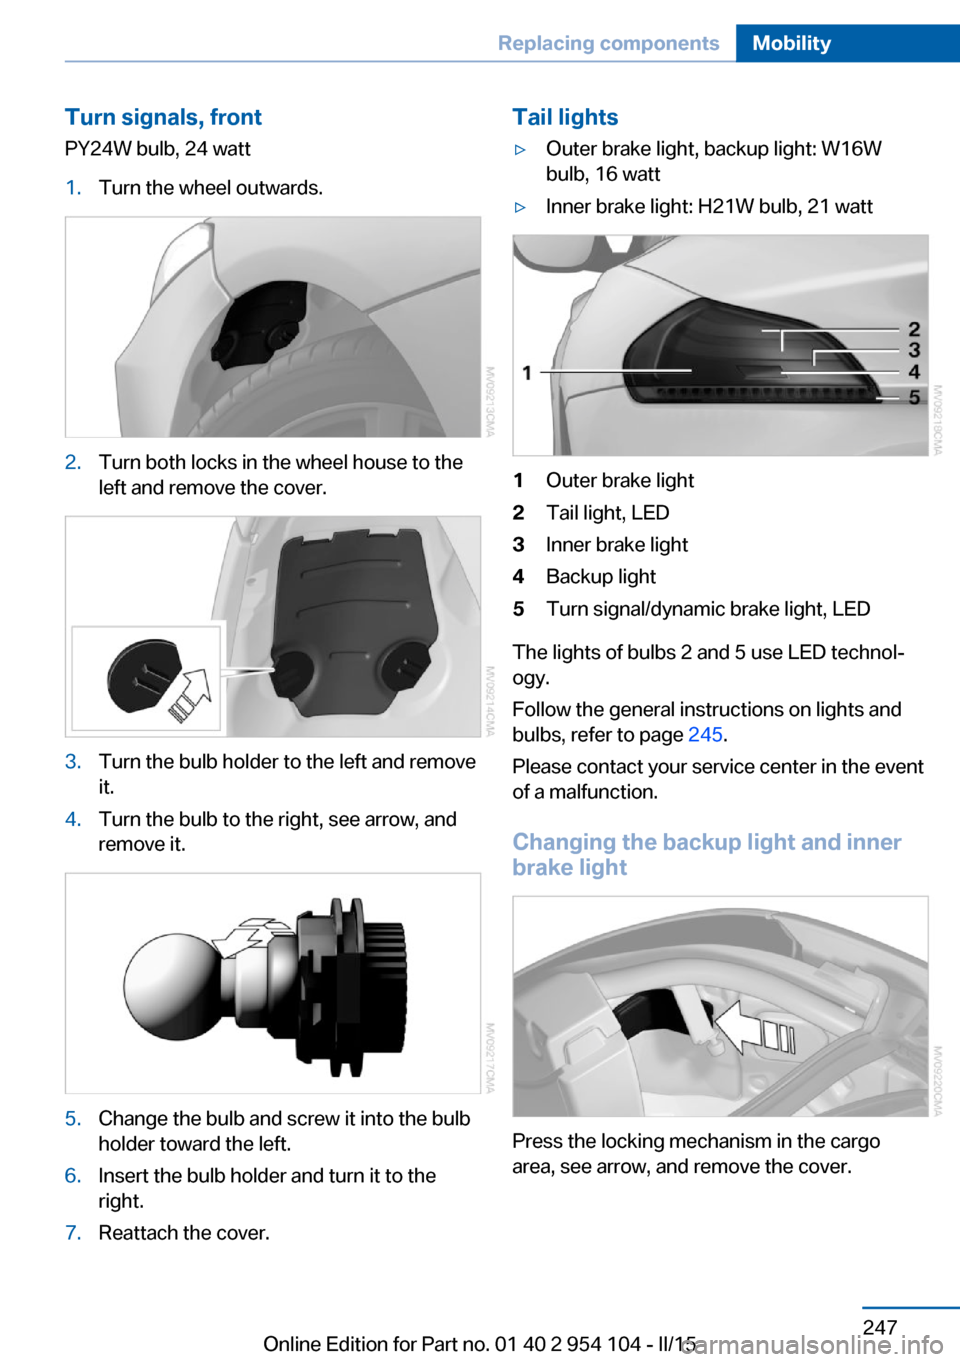 BMW Z4 2015 E89 Owners Manual Turn signals, frontPY24W bulb, 24 watt1.Turn the wheel outwards.2.Turn both locks in the wheel house to the
left and remove the cover.3.Turn the bulb holder to the left and remove
it.4.Turn the bulb t